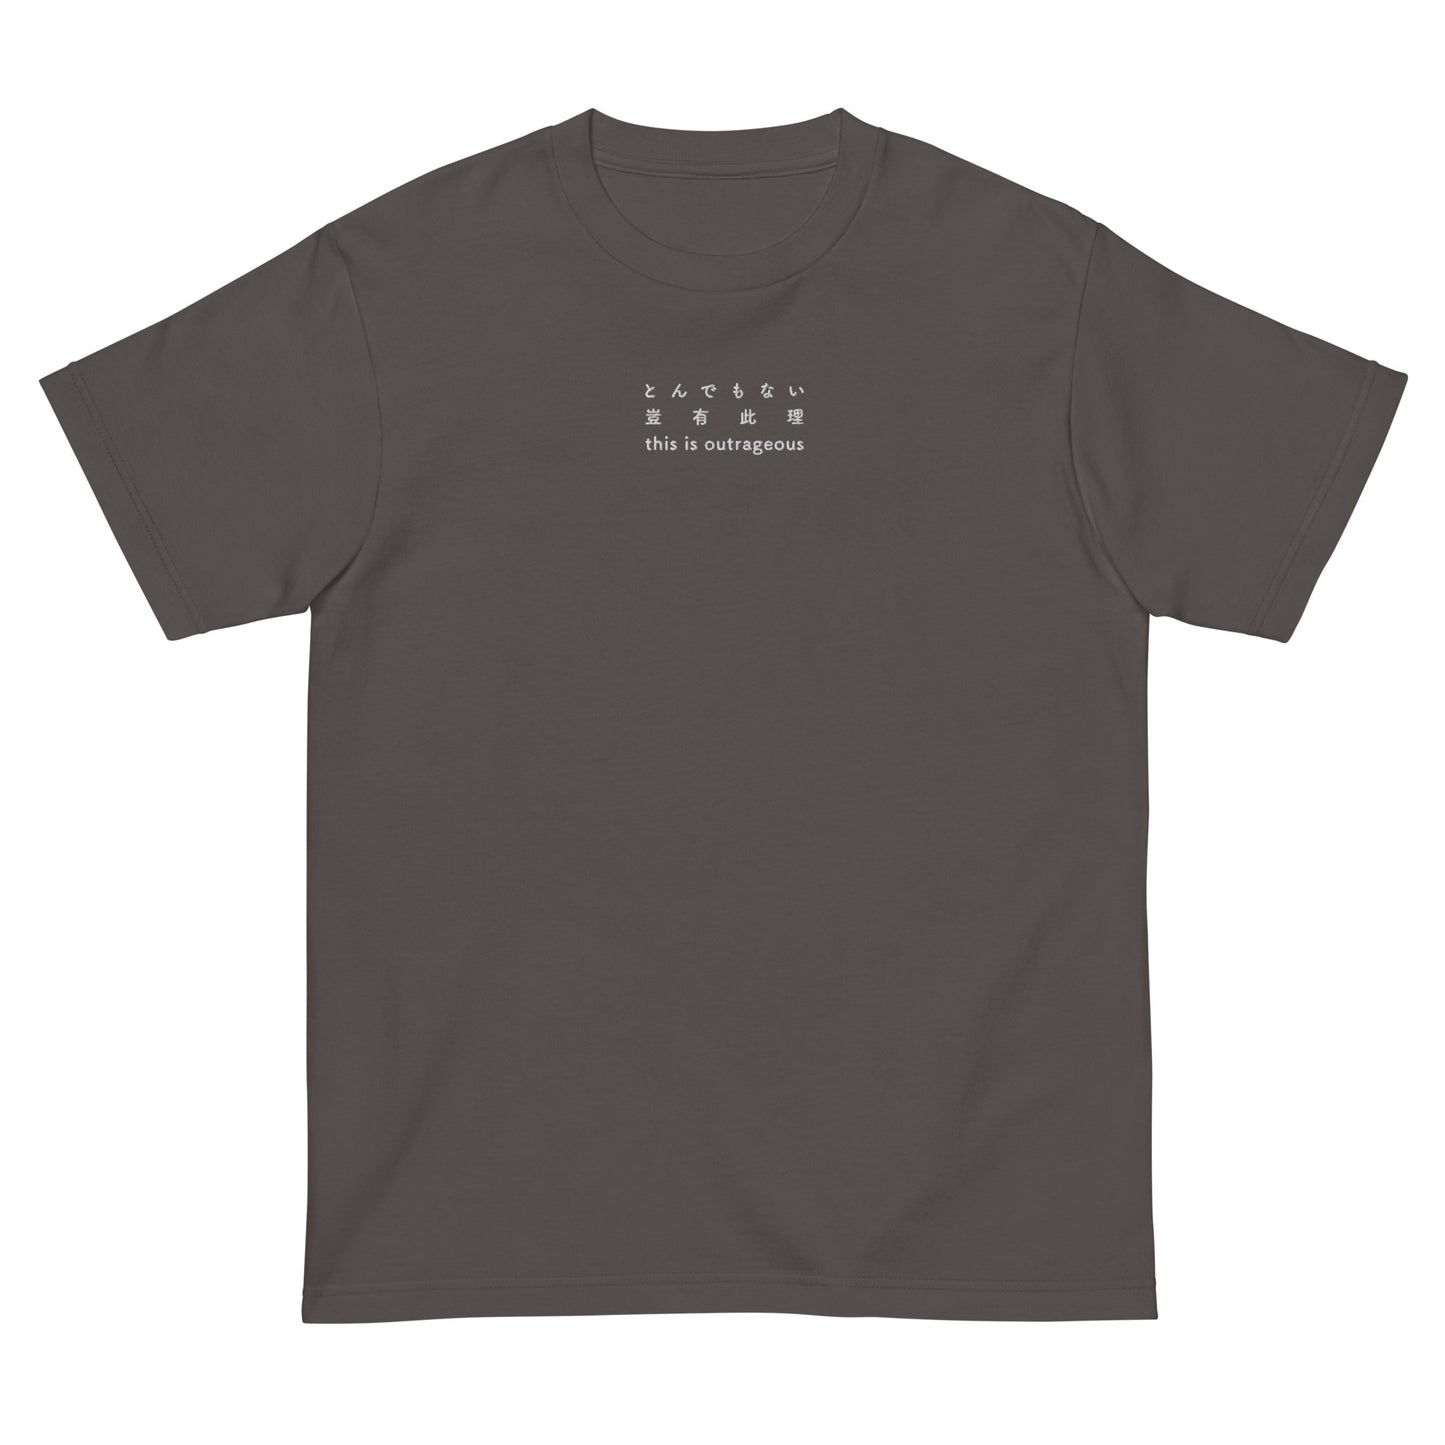 Charcoal Gray High Quality Tee - Front Design with an White Embroidery "This is Outrageous" in Japanese, Chinese and English